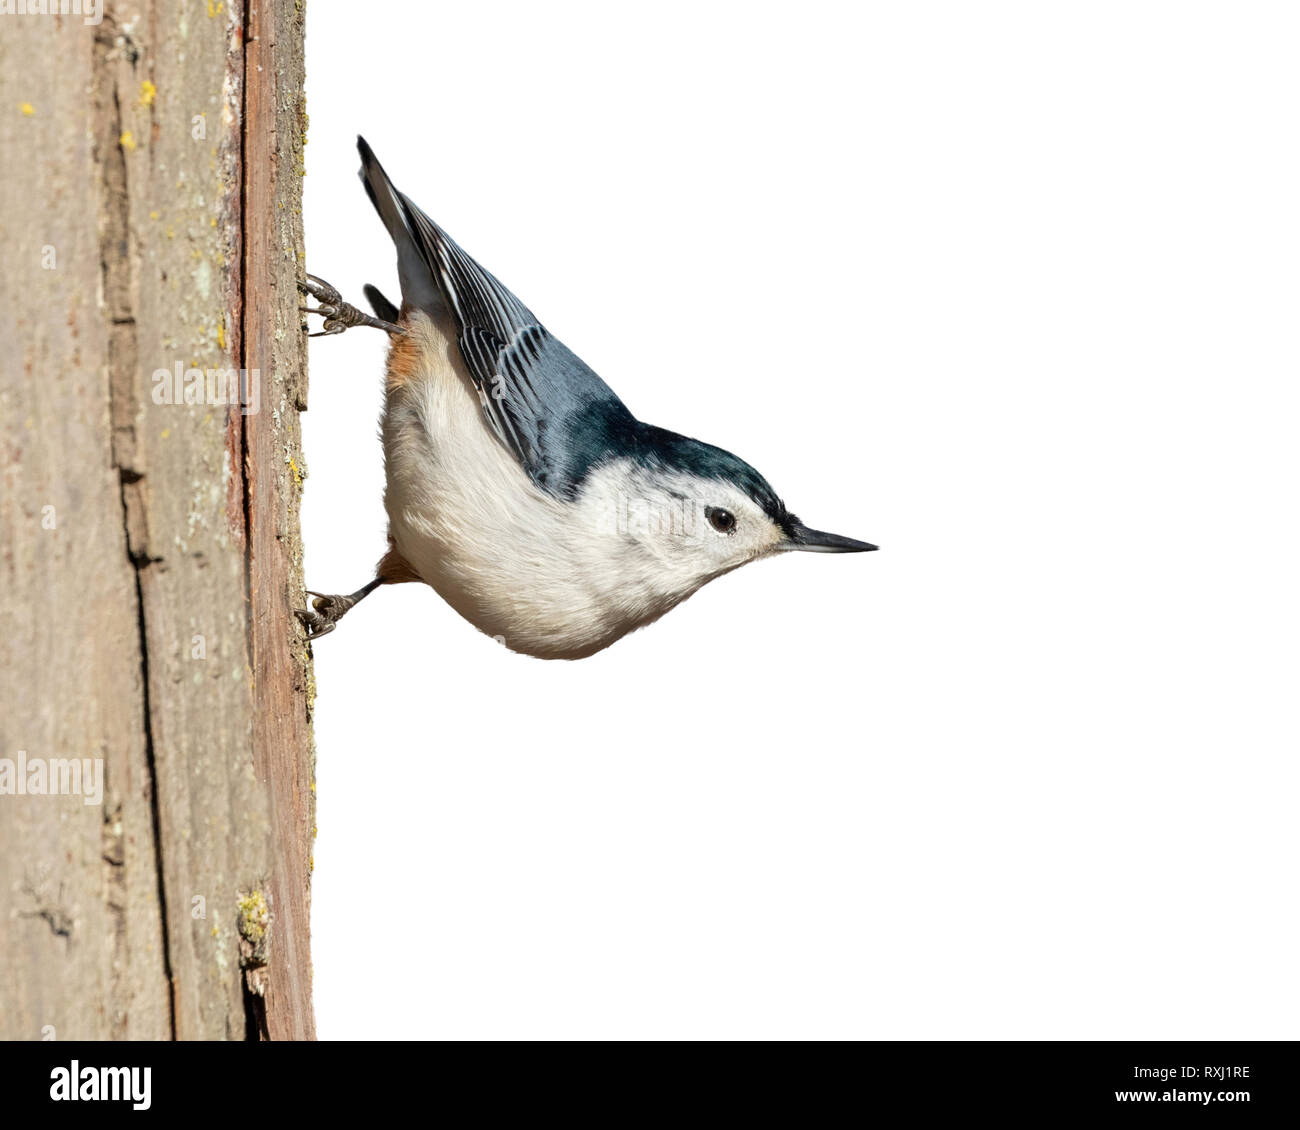 White-breasted nuthatch (Sitta carolinensis) on a tree trunk, isolated on white background, clipping path attached. Stock Photo